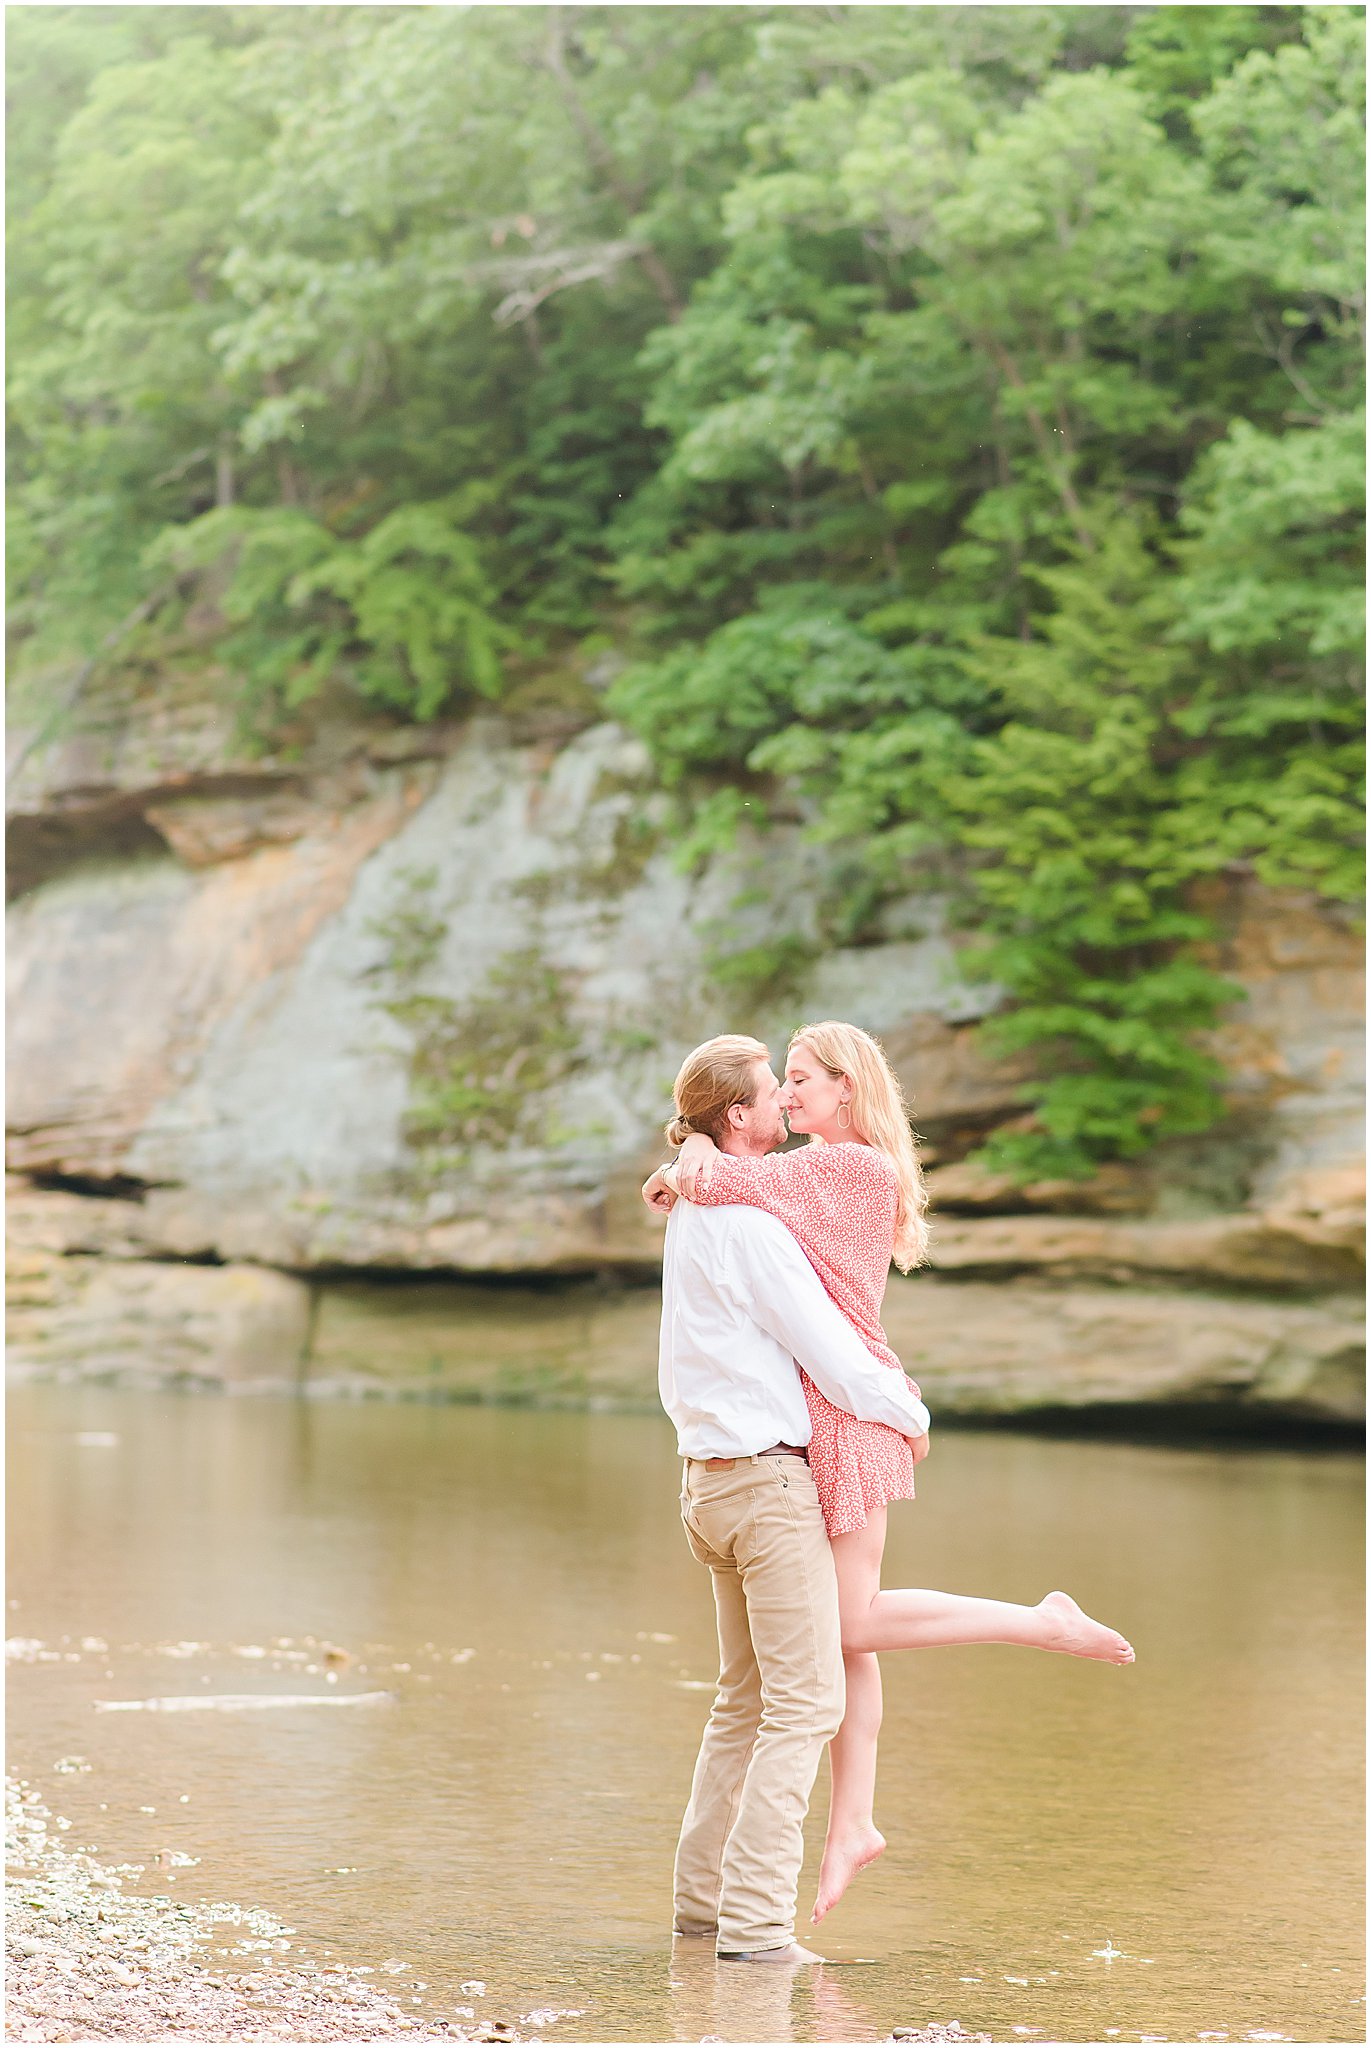 Lift kiss in the water during Turkey Run State Park engagement session